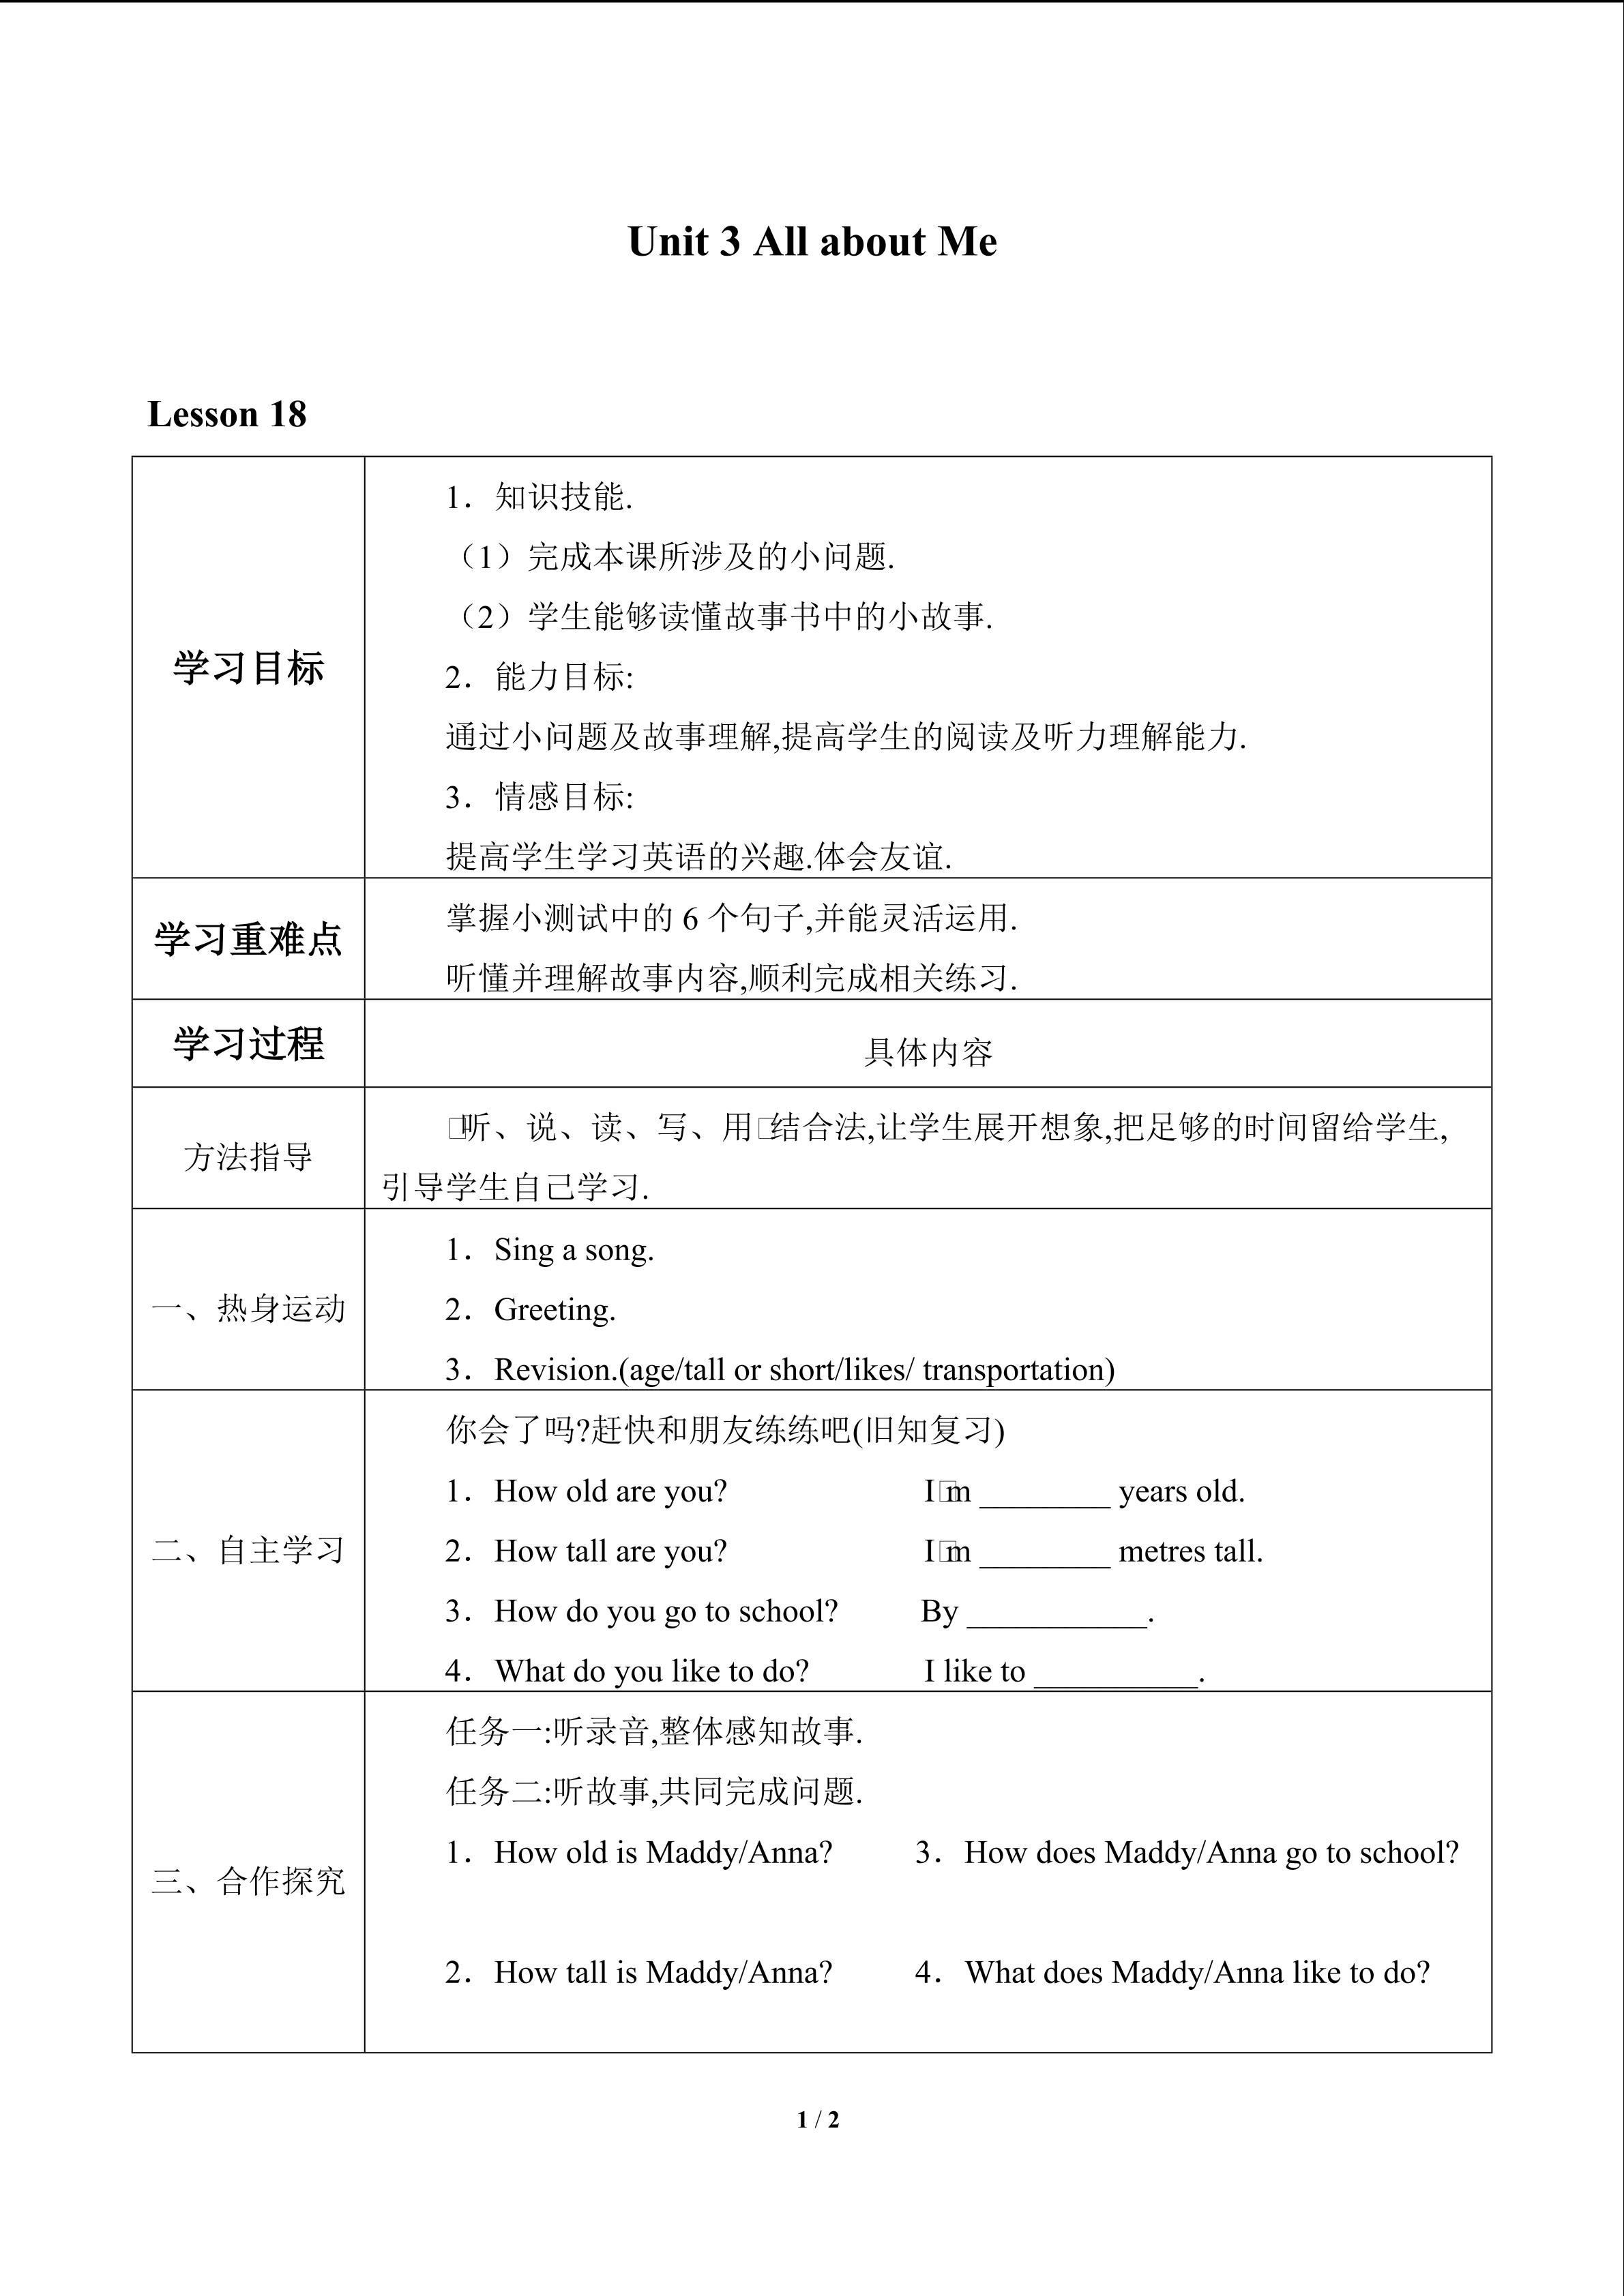 Unit 3 All about Me_学案6